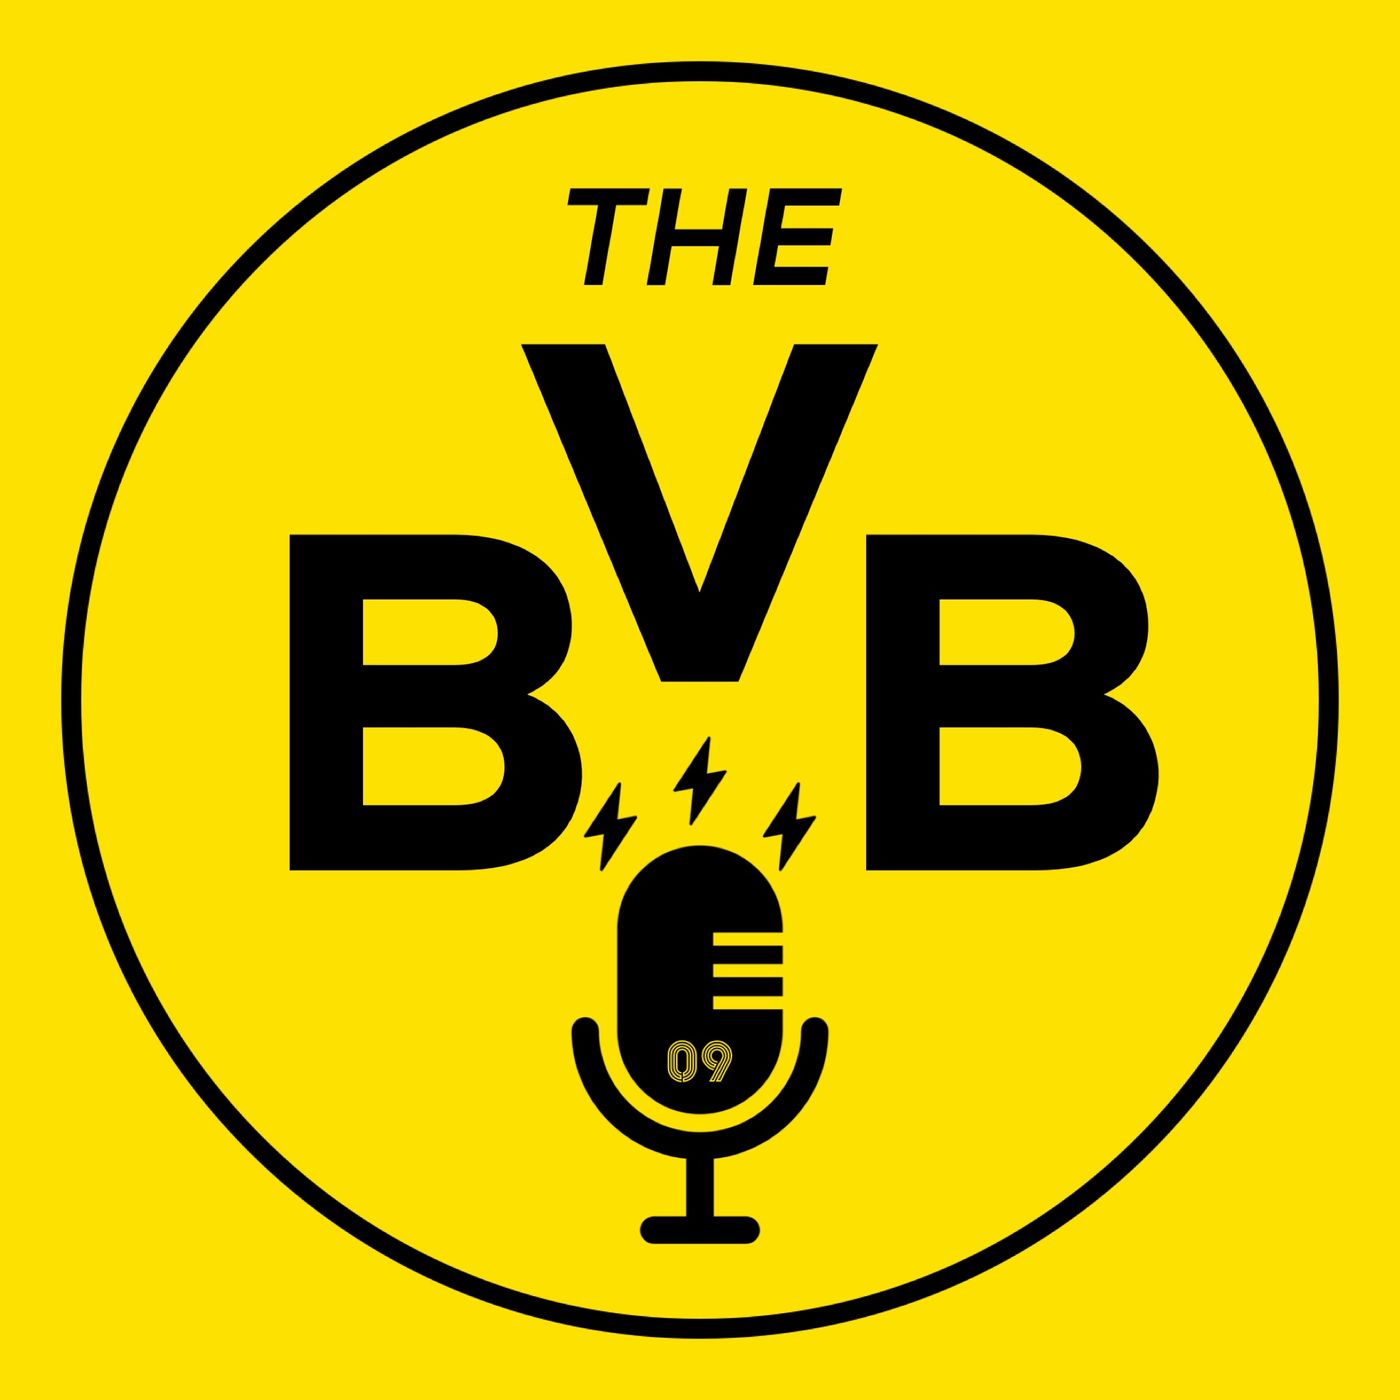 DRAW AT THE DEATH | BVB vs Bayer Leverkusen Review - EP 91